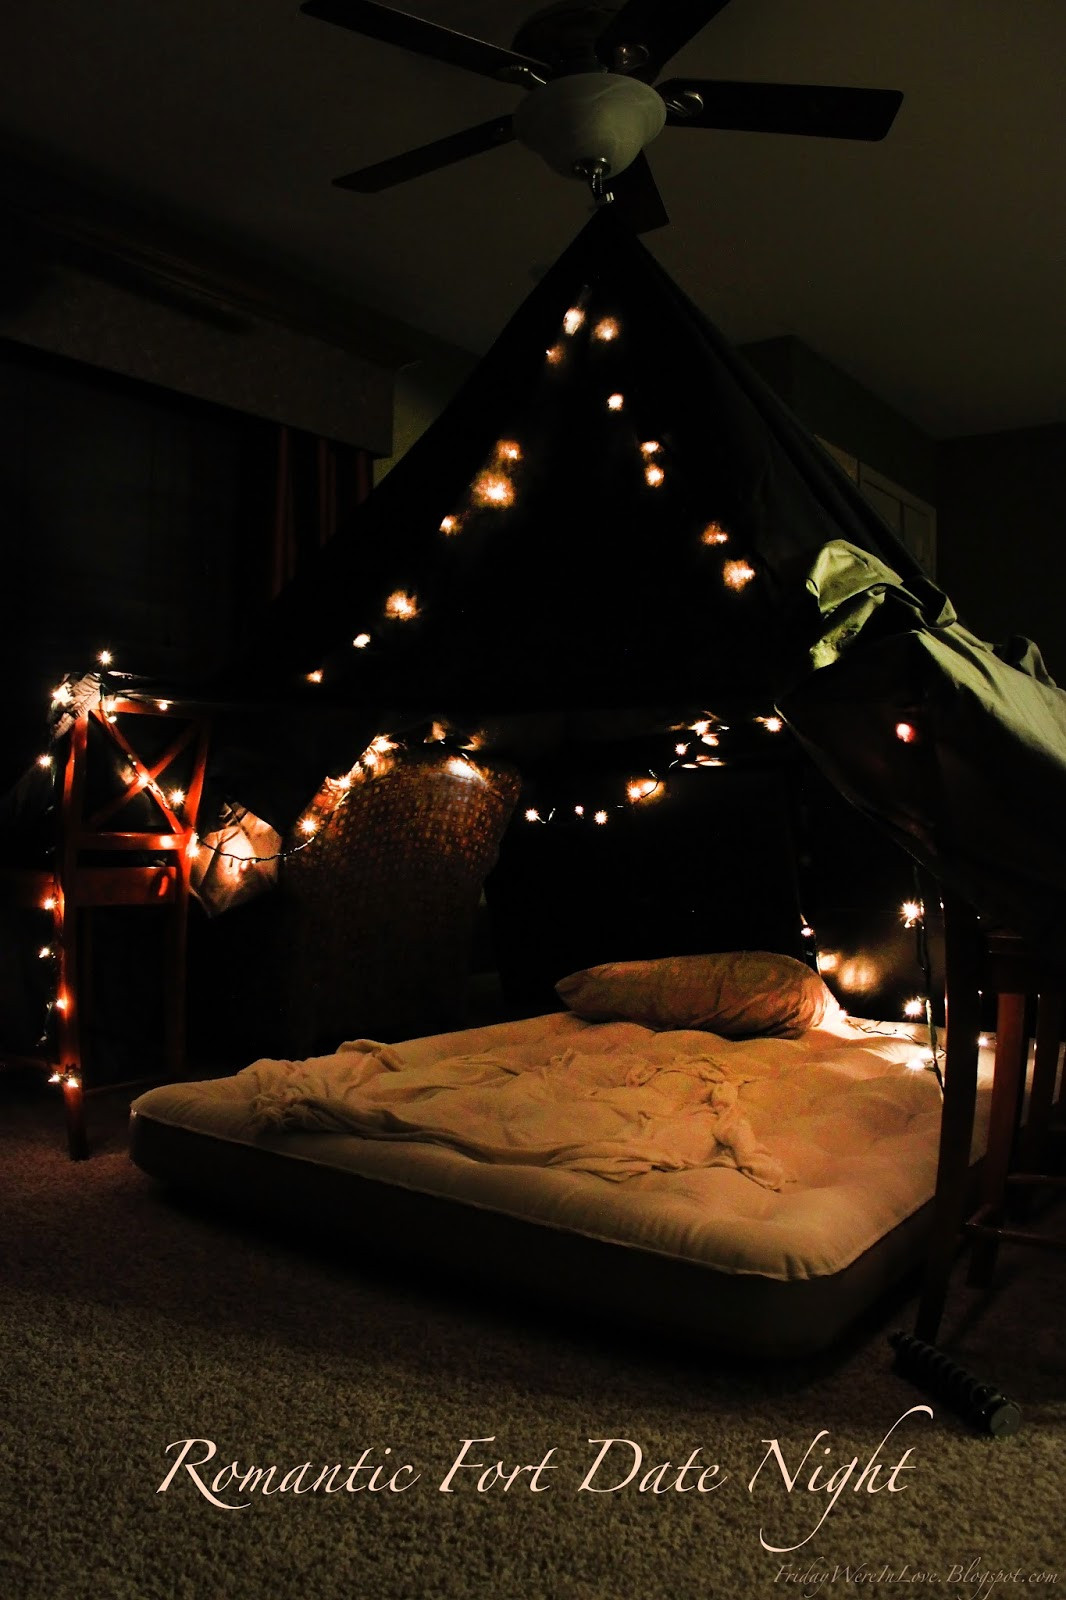 Romantic Dinner Date Ideas
 12 Months of Dates January Romantic Fort Night Friday